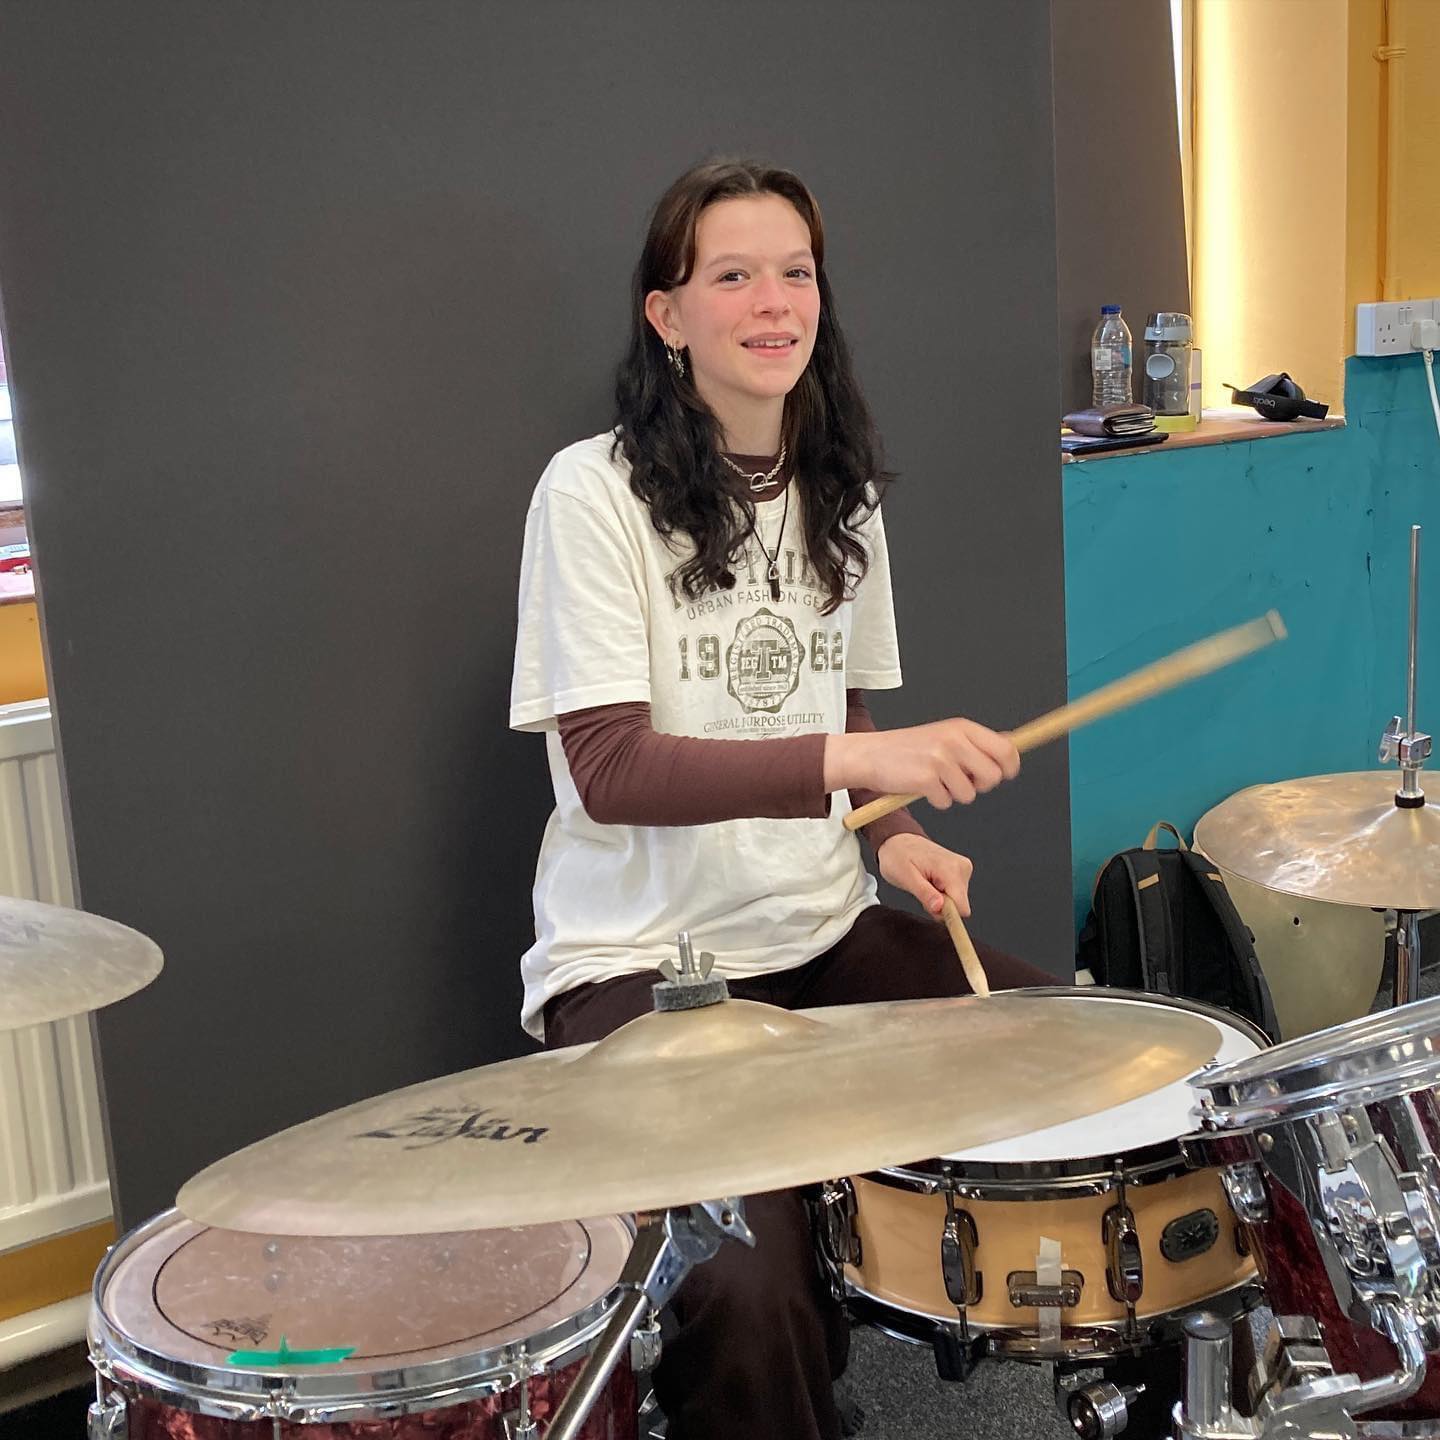 A teenager plays the drums for the LS18 Rocks project